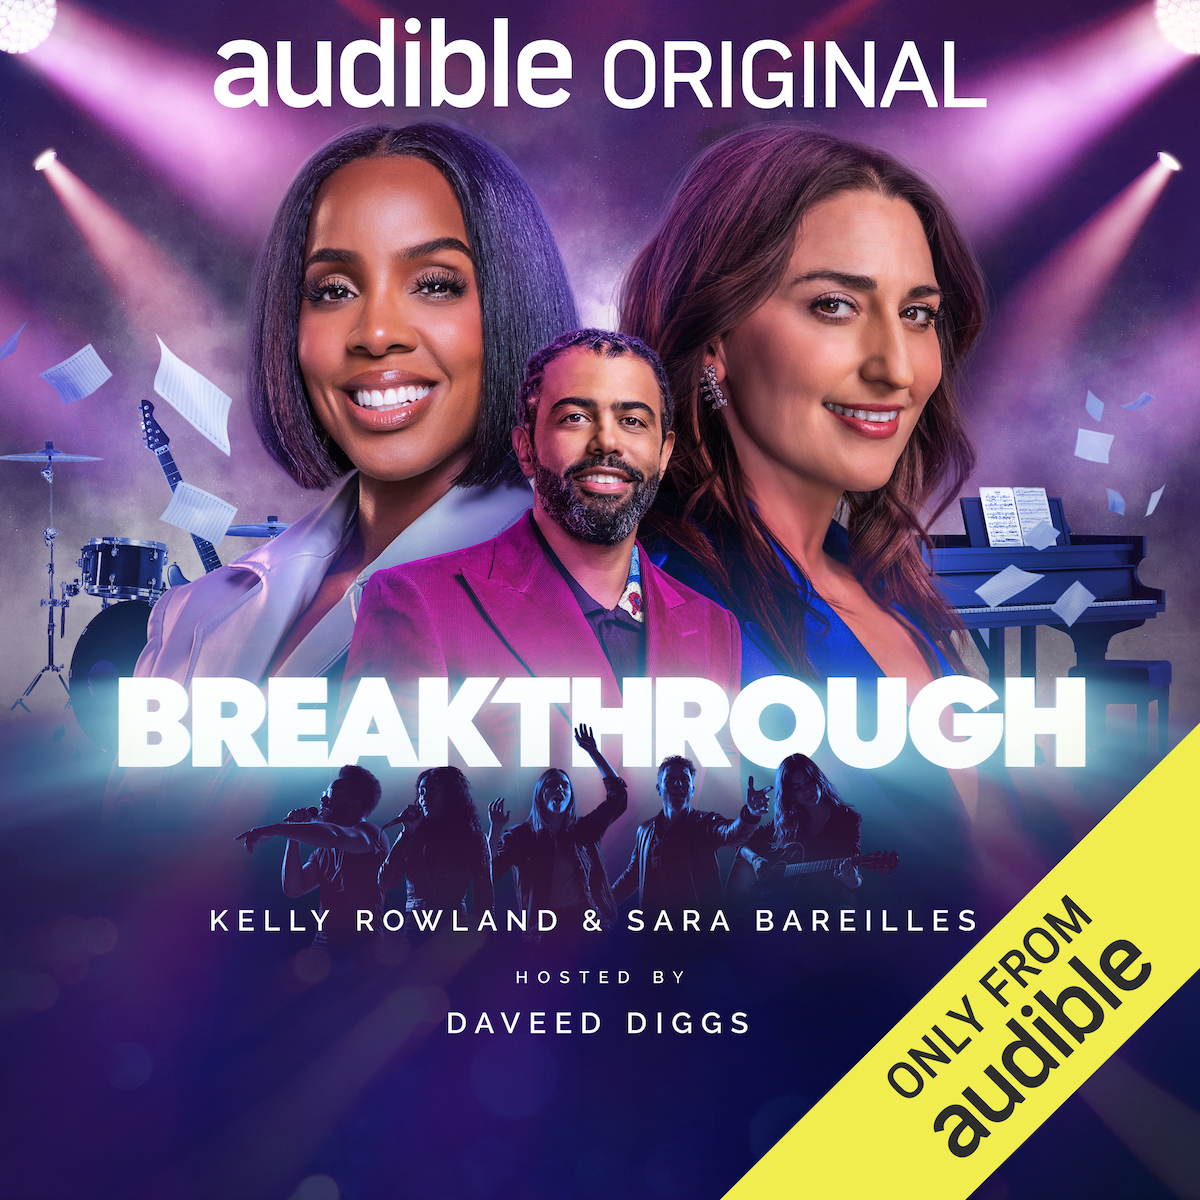 Breakthrough key art featuring Sara Bareilles Kelly Rowland and Daveed Diggs